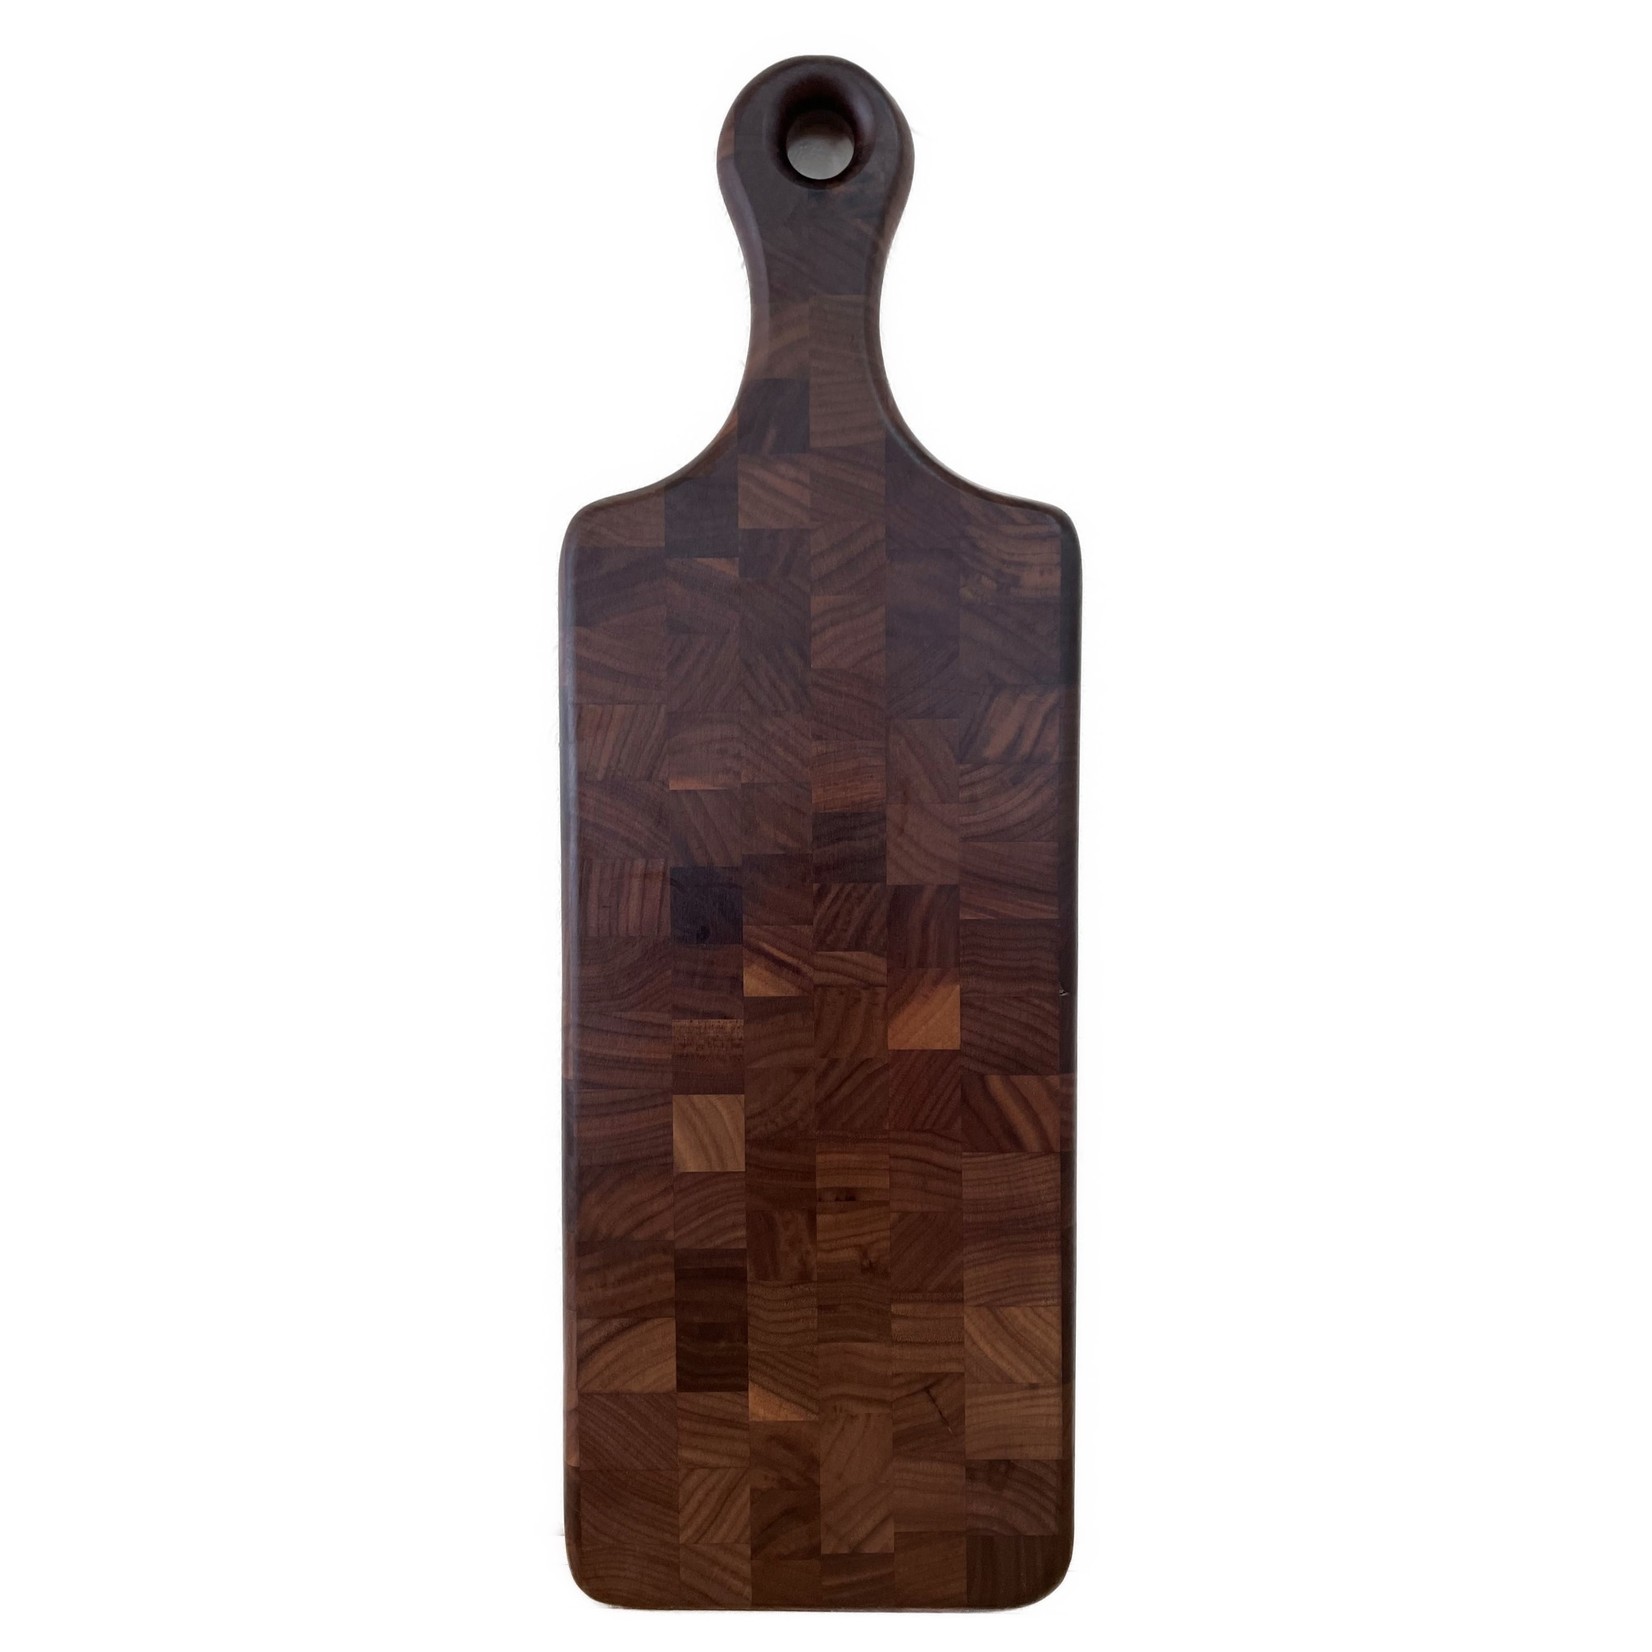 End Grain Boards with Handle